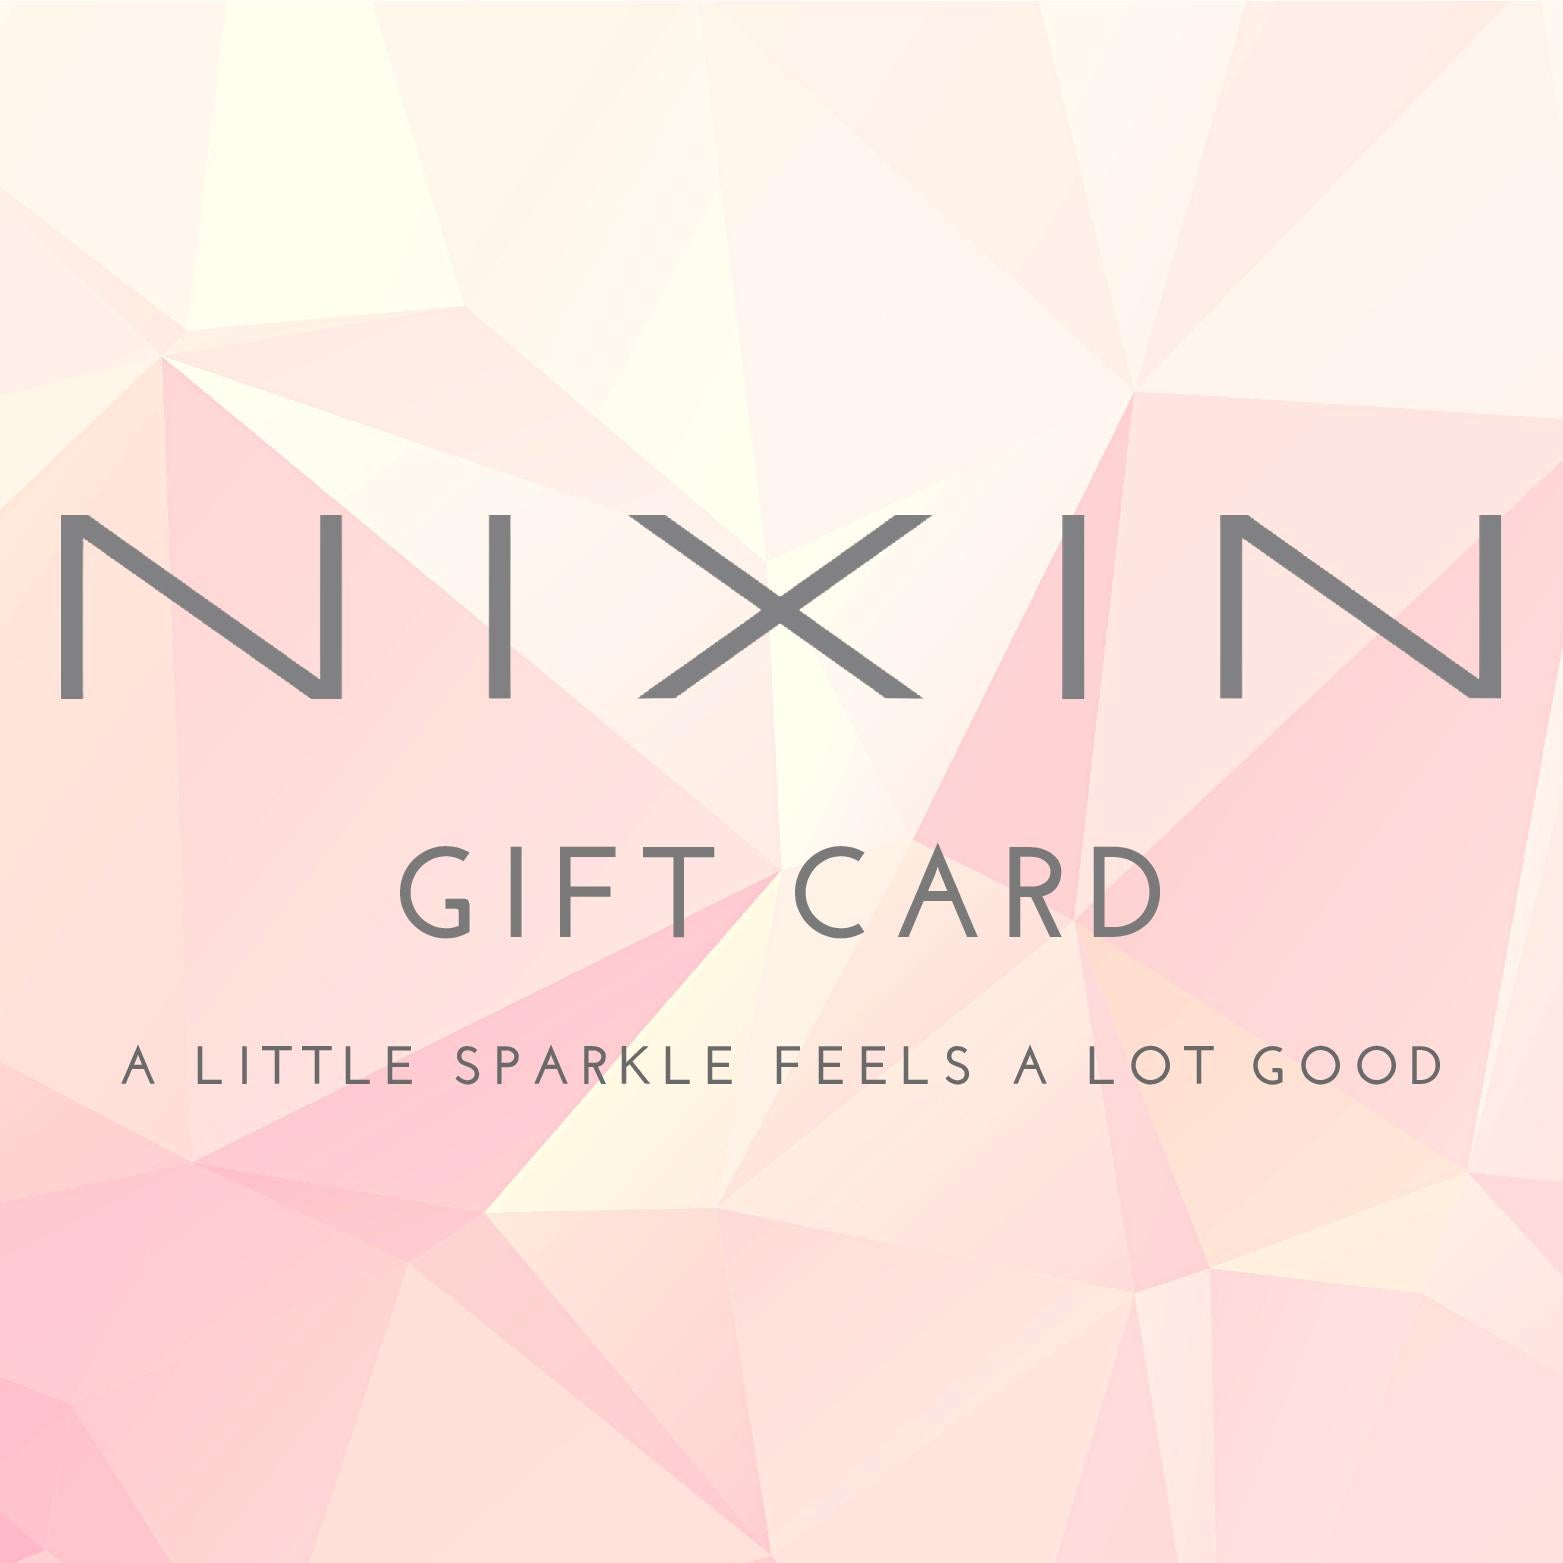 Sparkle in Pink Gift Card